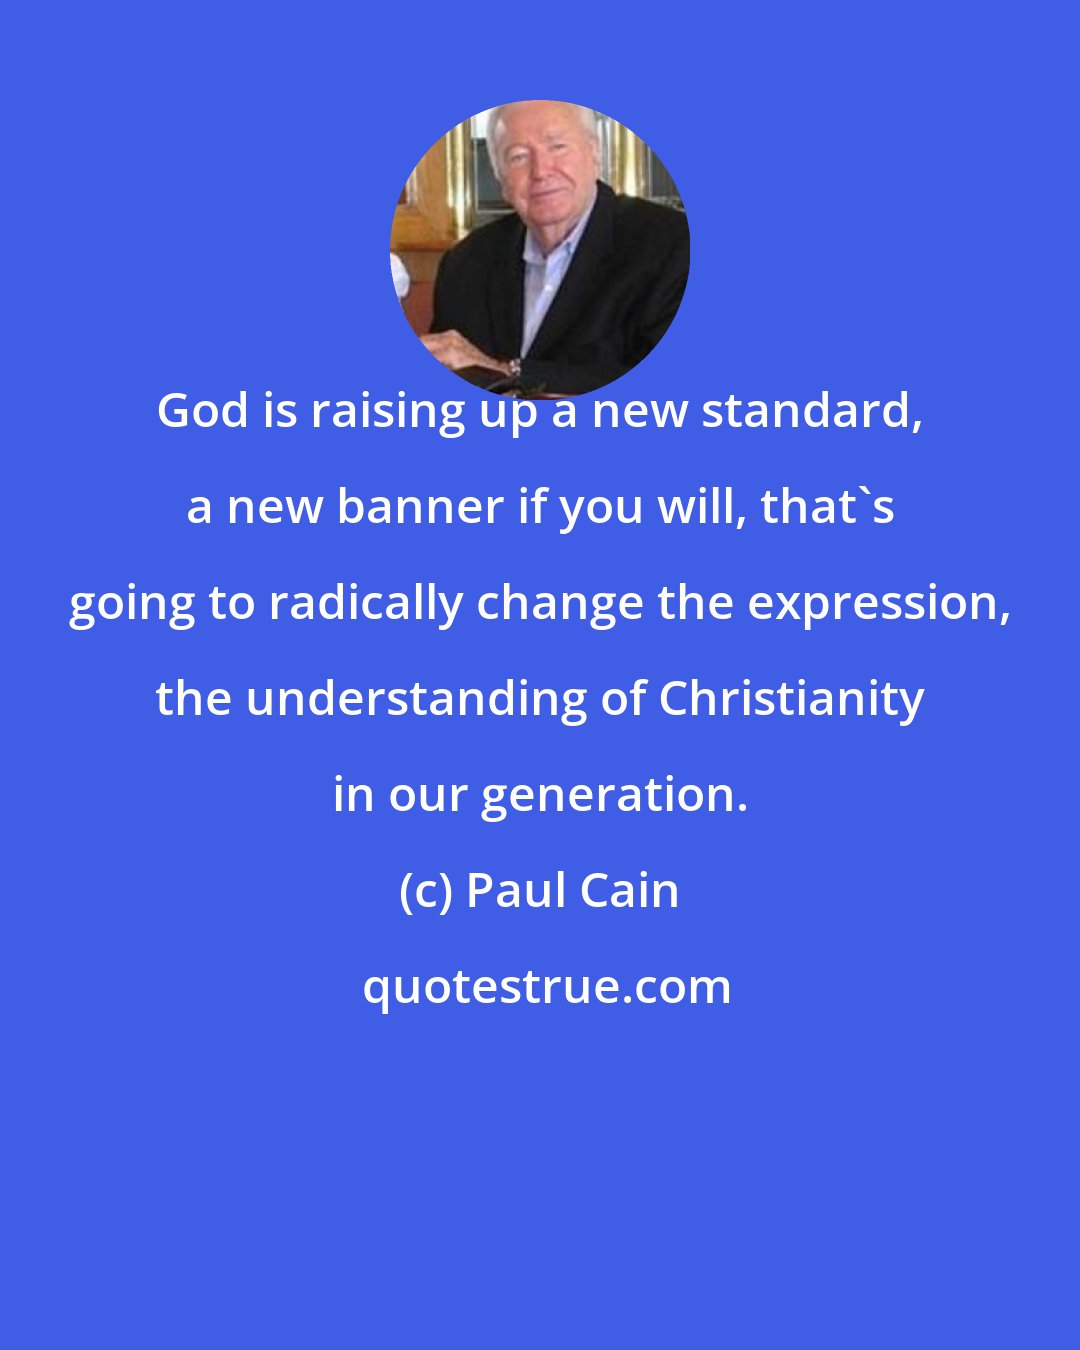 Paul Cain: God is raising up a new standard, a new banner if you will, that's going to radically change the expression, the understanding of Christianity in our generation.